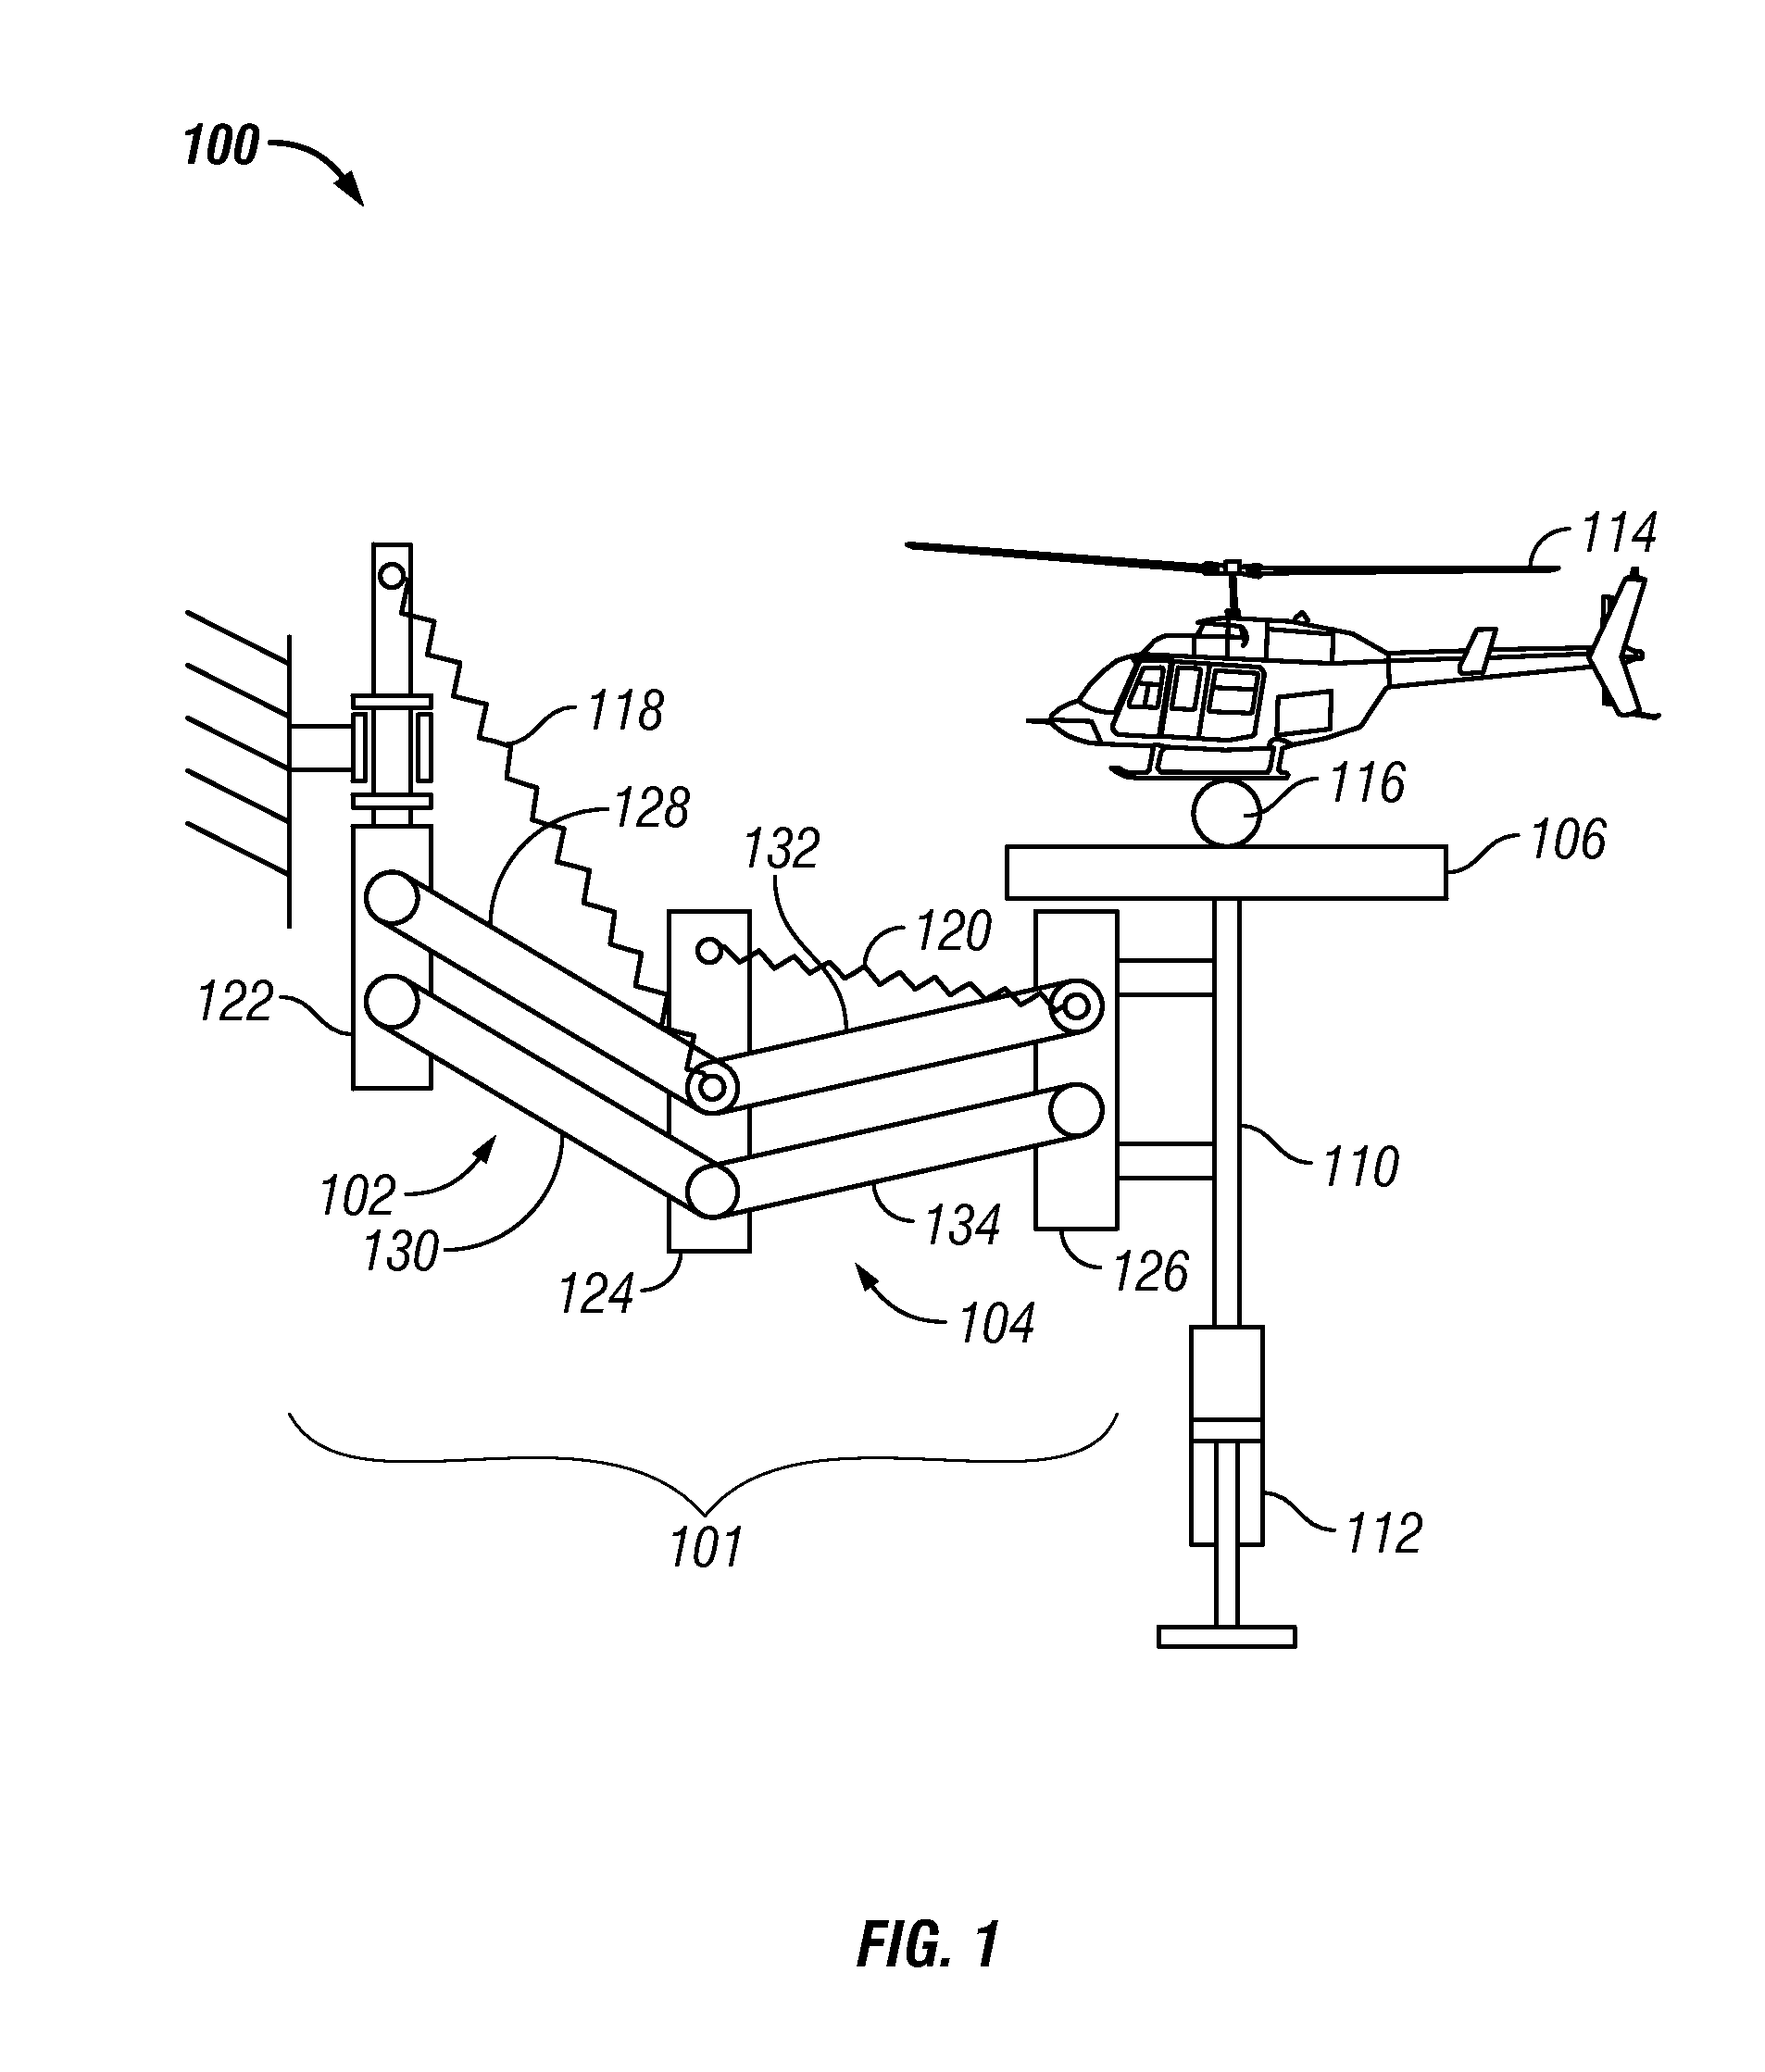 Multi-degree-of-freedom test stand for unmanned air vehicles